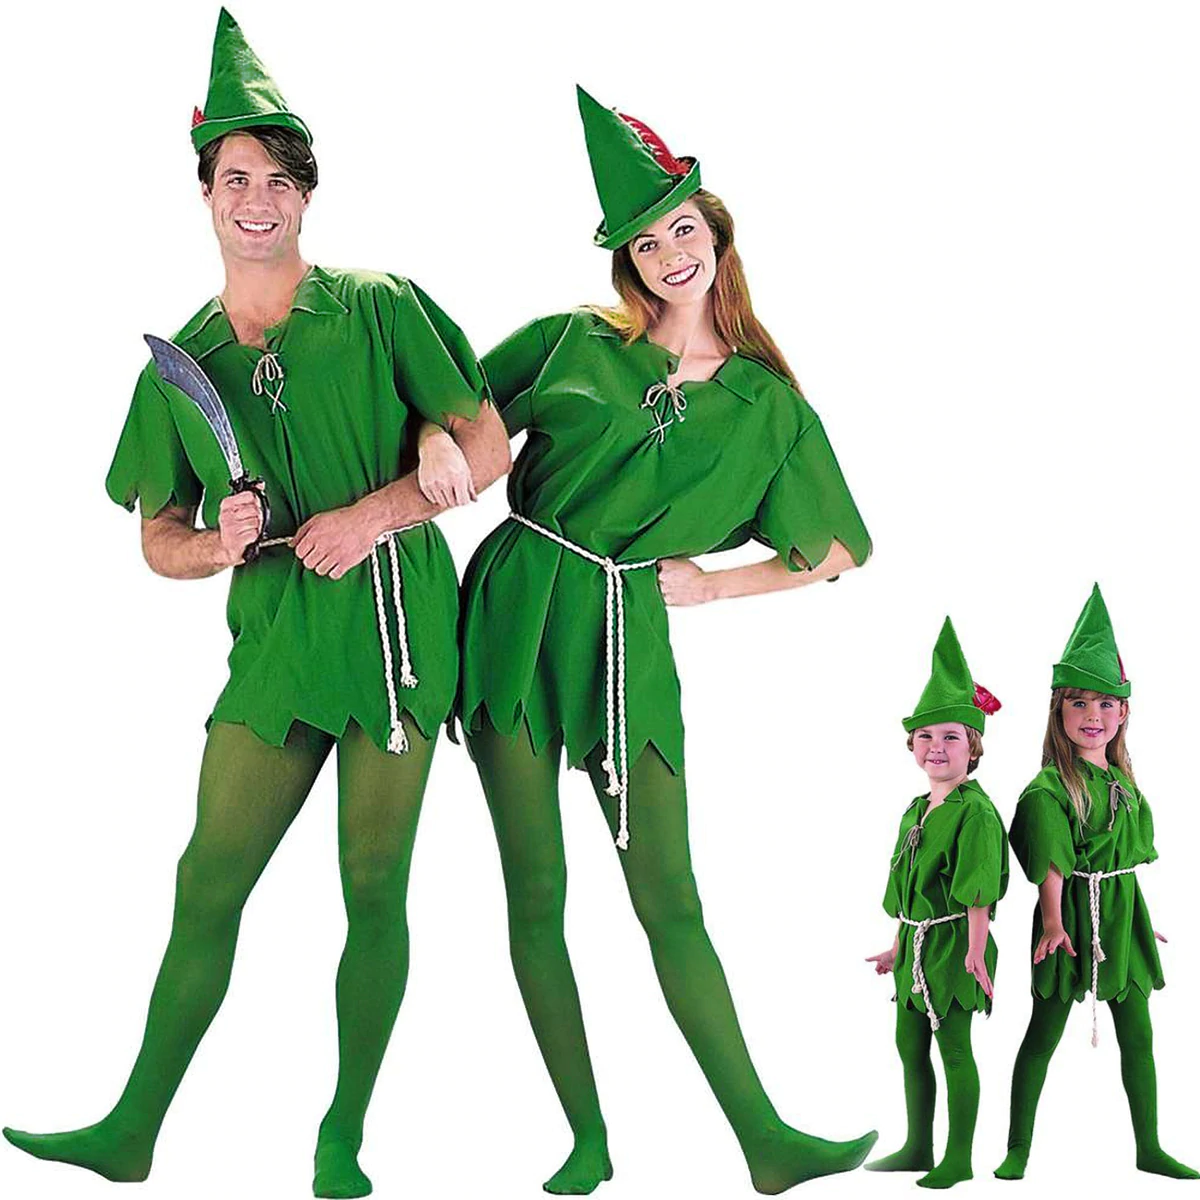 Peter Pan Robin Hood Storybook Kid Adult Dress Up Party Green Costume